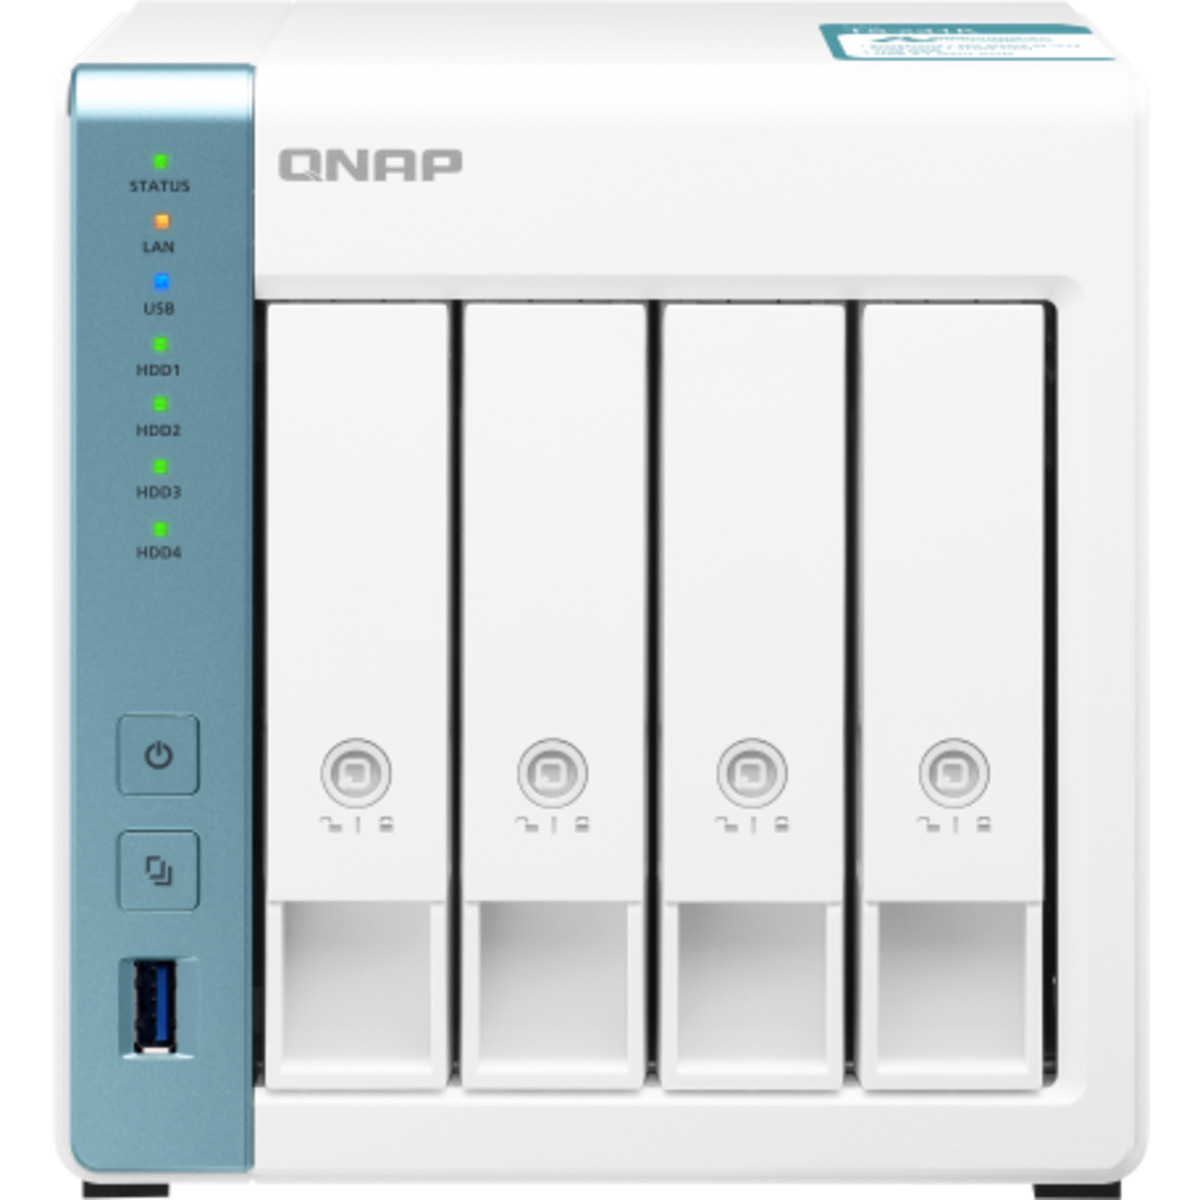 buy $1340 QNAP TS-431K 32tb Desktop NAS - Network Attached Storage Device 4x8000gb Toshiba Enterprise Capacity MG08ADA800E 3.5 7200rpm SATA 6Gb/s HDD ENTERPRISE Class Drives Installed - Burn-In Tested - ON SALE - nas headquarters buy network attached storage server device das new raid-5 free shipping usa christmas new year holiday sale TS-431K